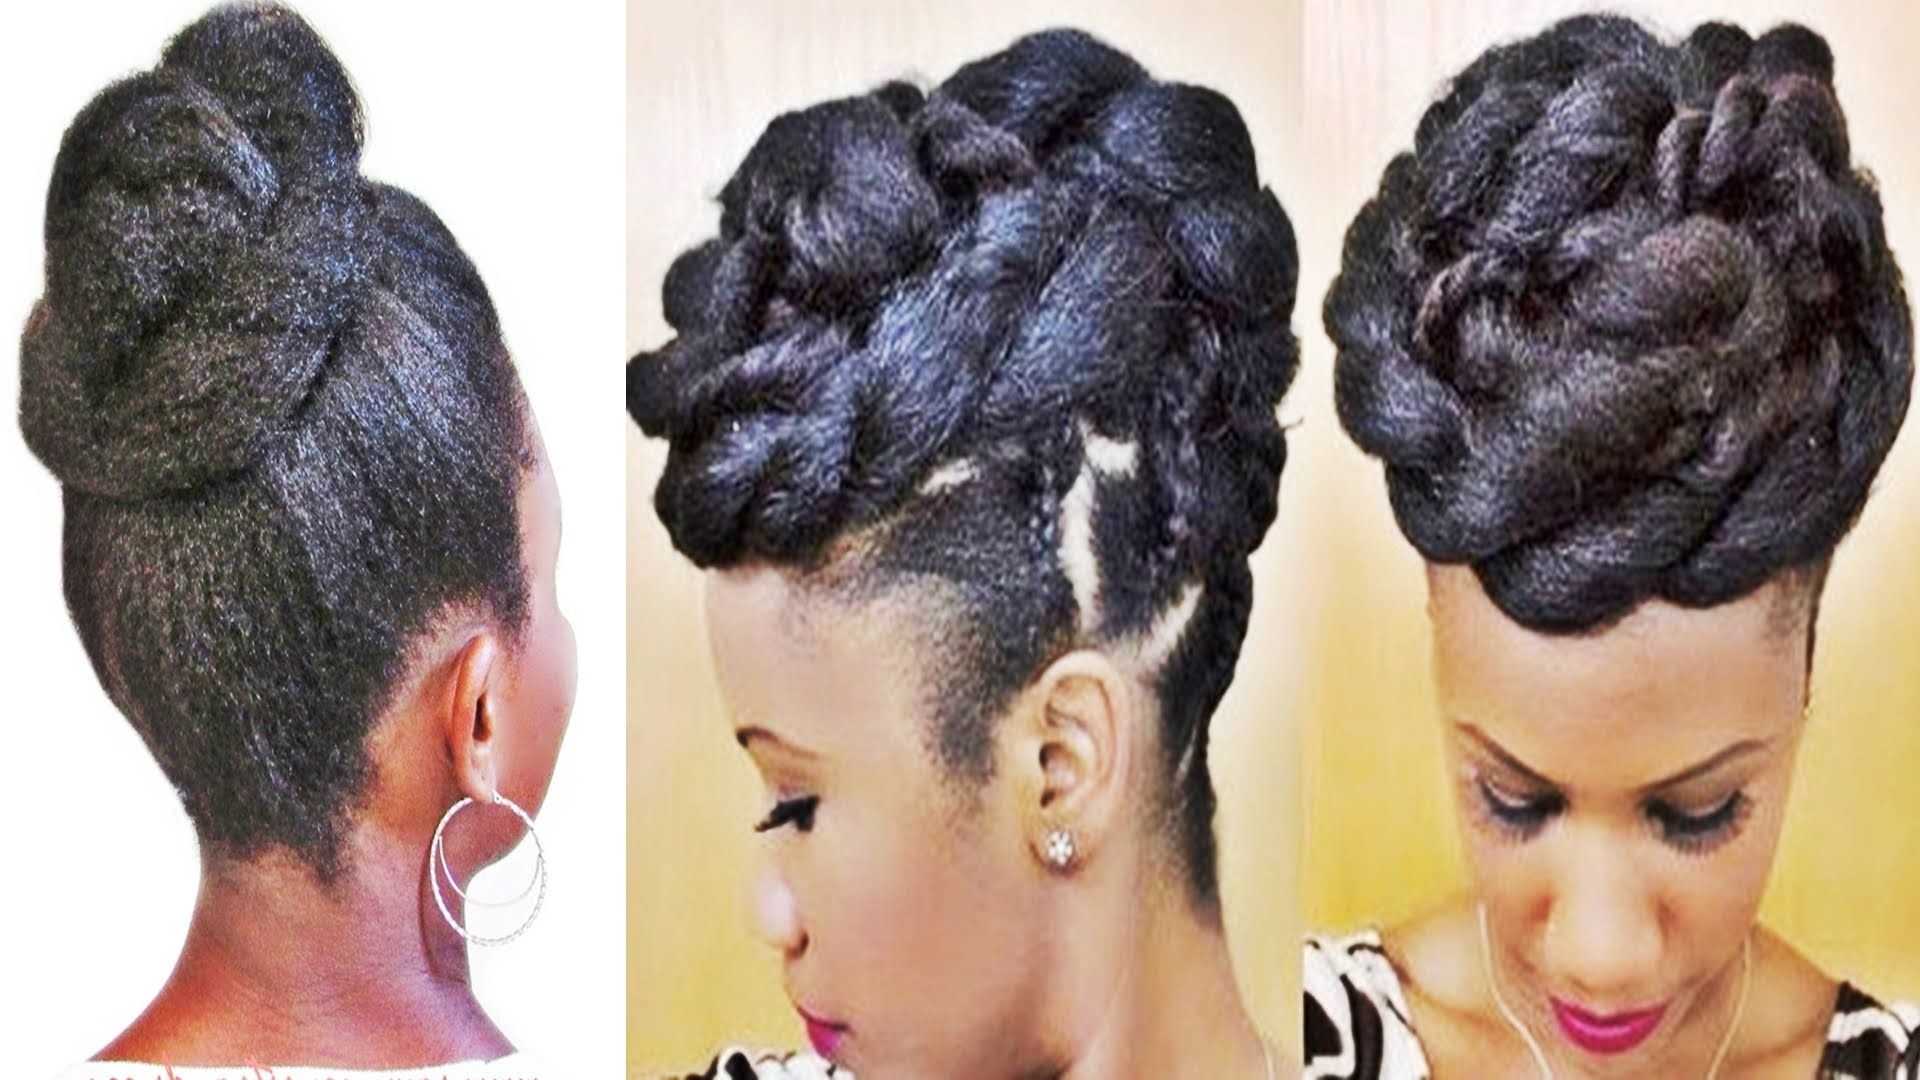 Braids And Twists Updo Hairstyle For Black Women – Youtube Within Quick And Easy Updo Hairstyles For Black Hair (View 10 of 15)